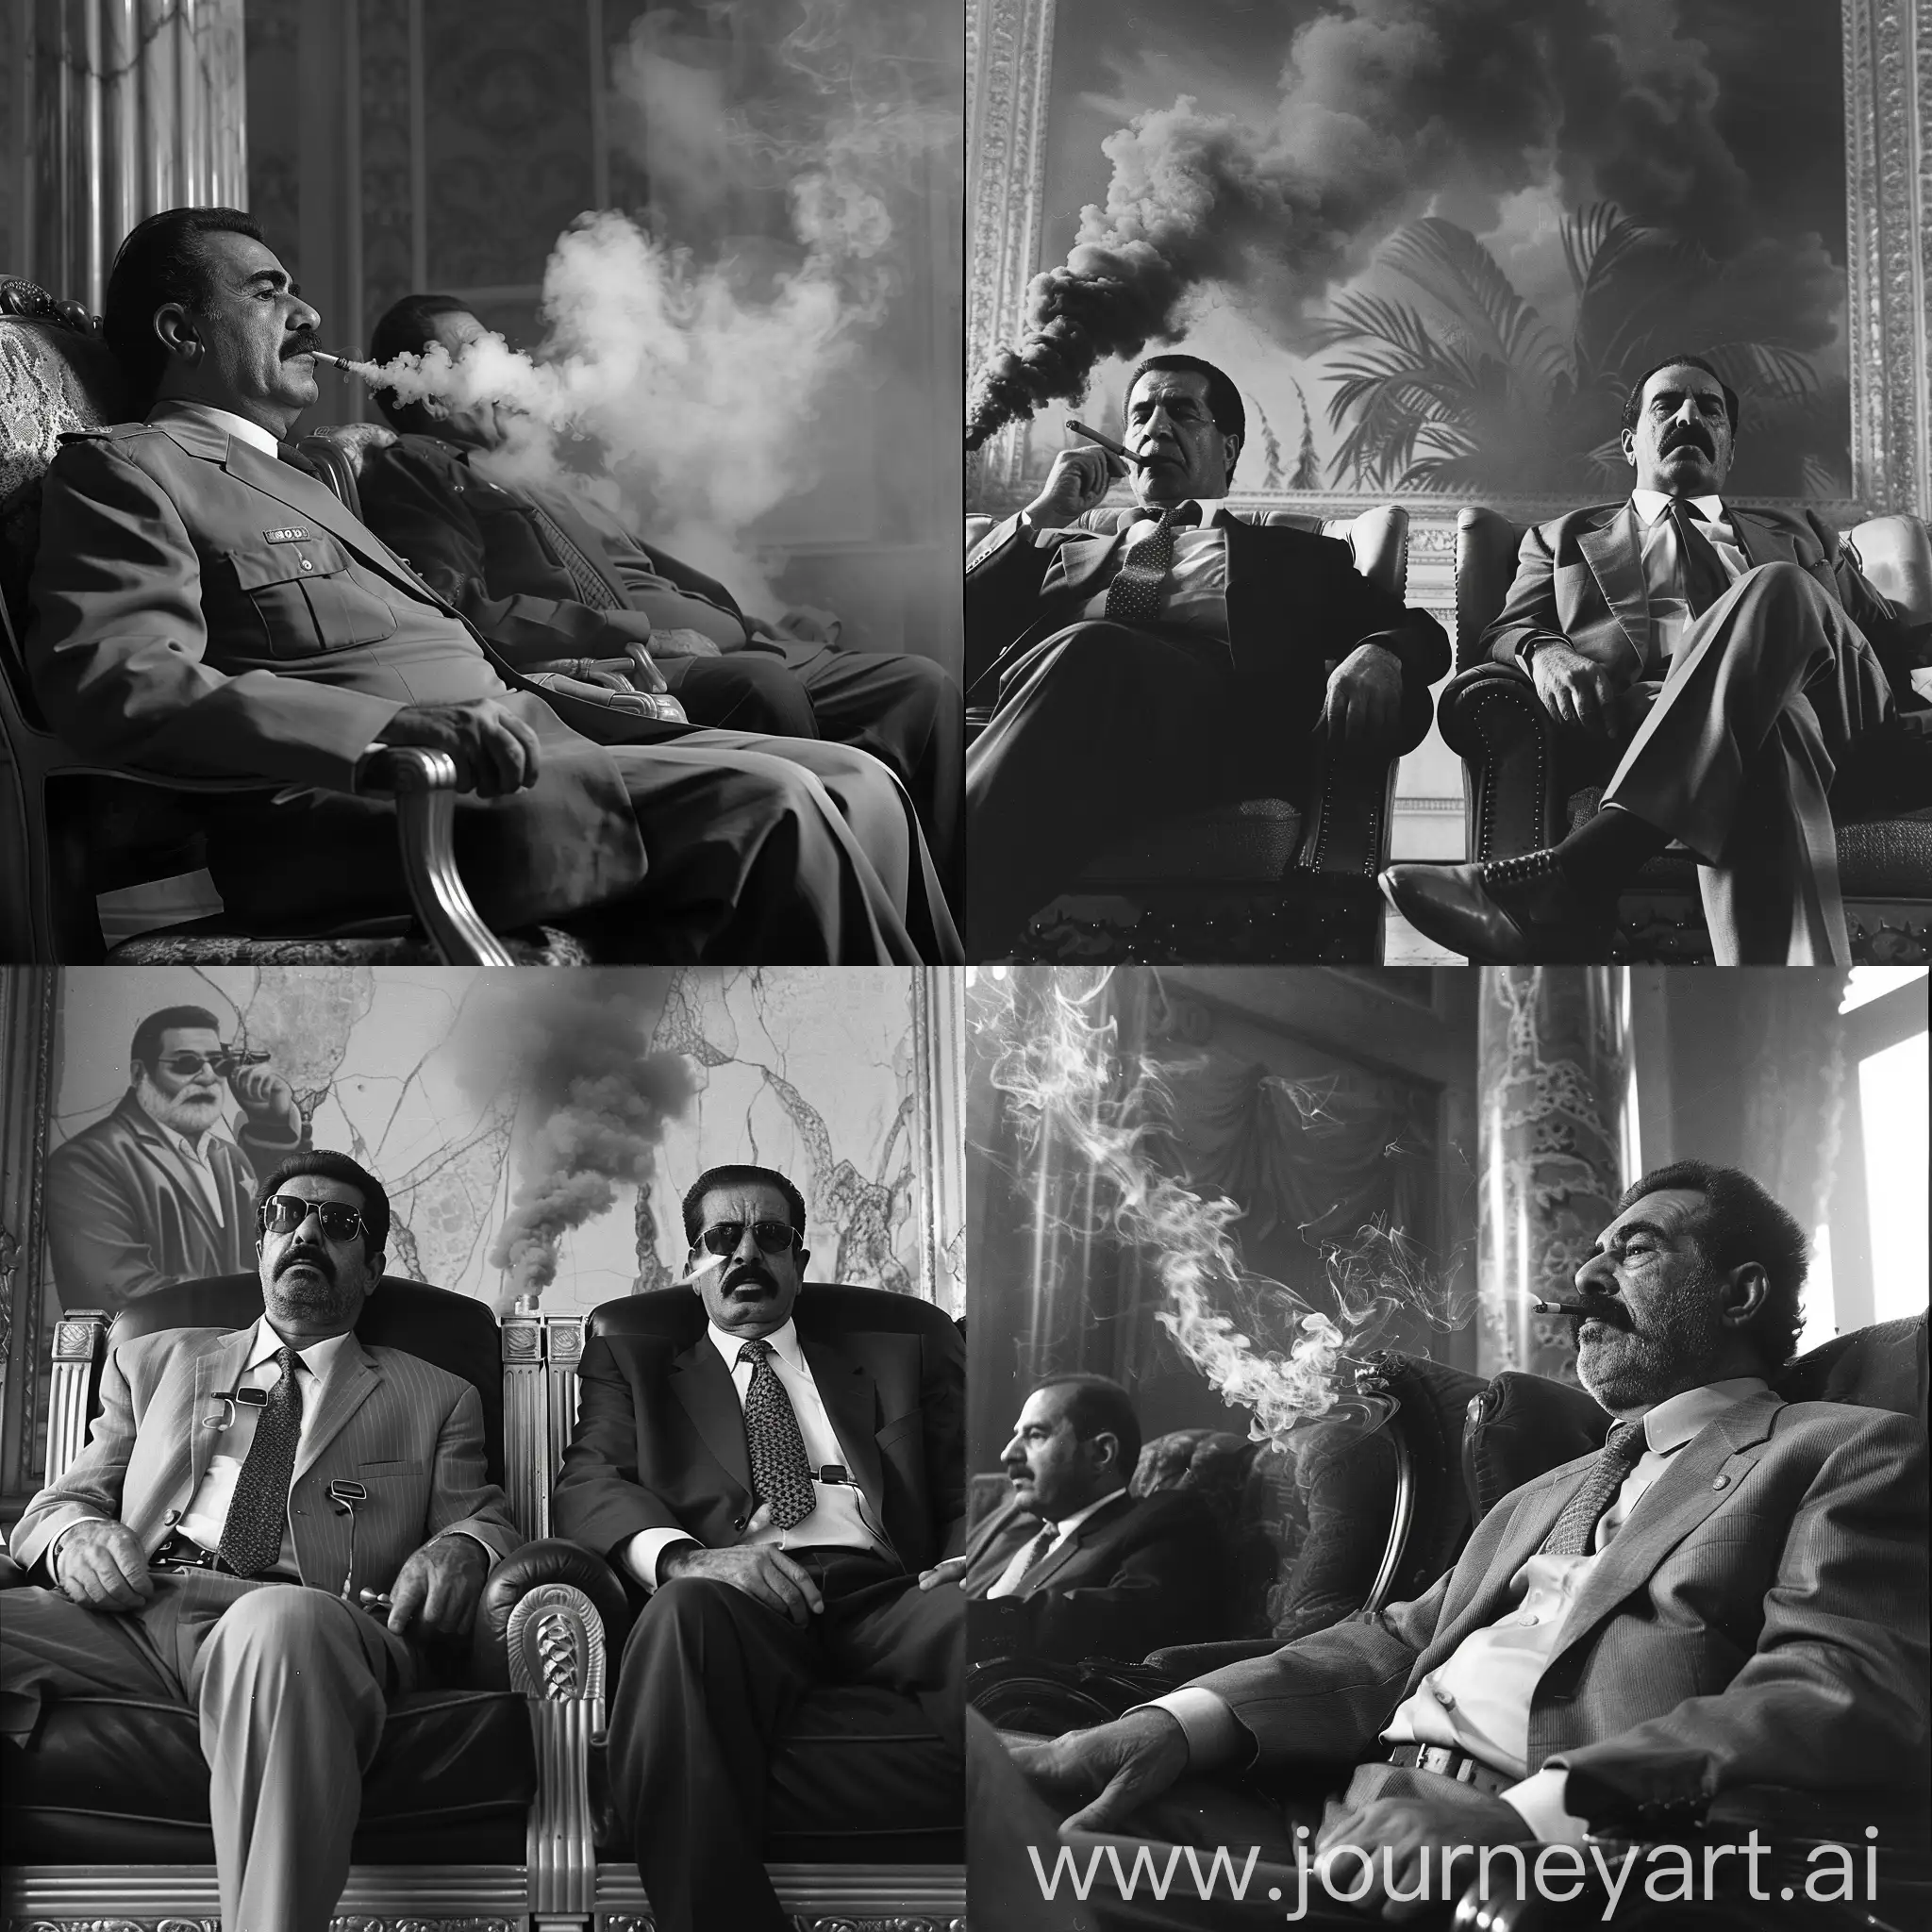 Saddam Hussein sits in a presidential chair with another person and they smoke Old black and white photo, pfp